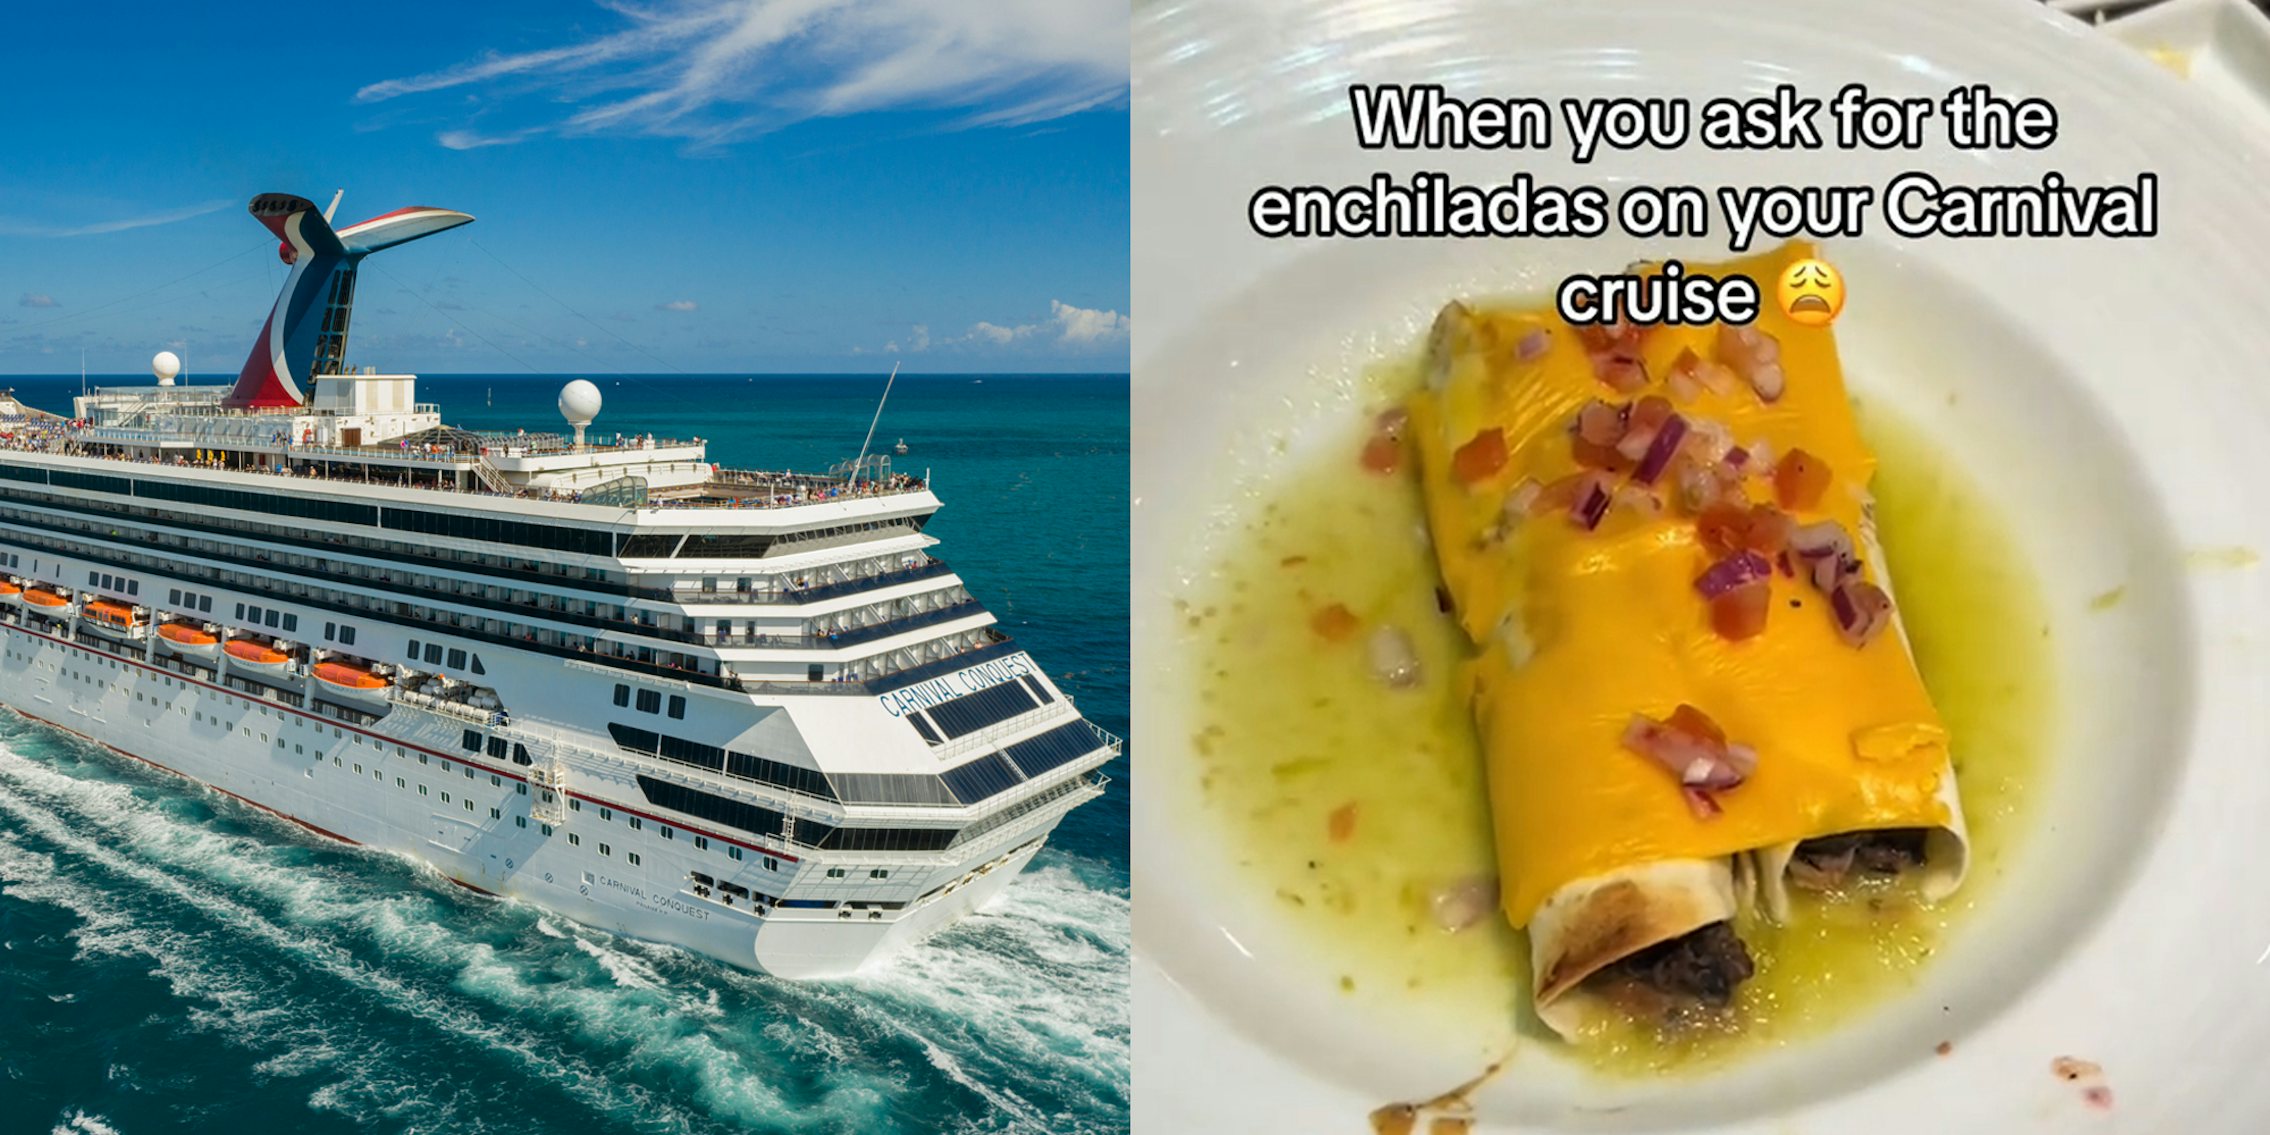 Carnival Cruise ship (l) Carnival Cruise enchiladas on plate with caption 'When you ask for the enchiladas on your Carnival Cruise' (r)